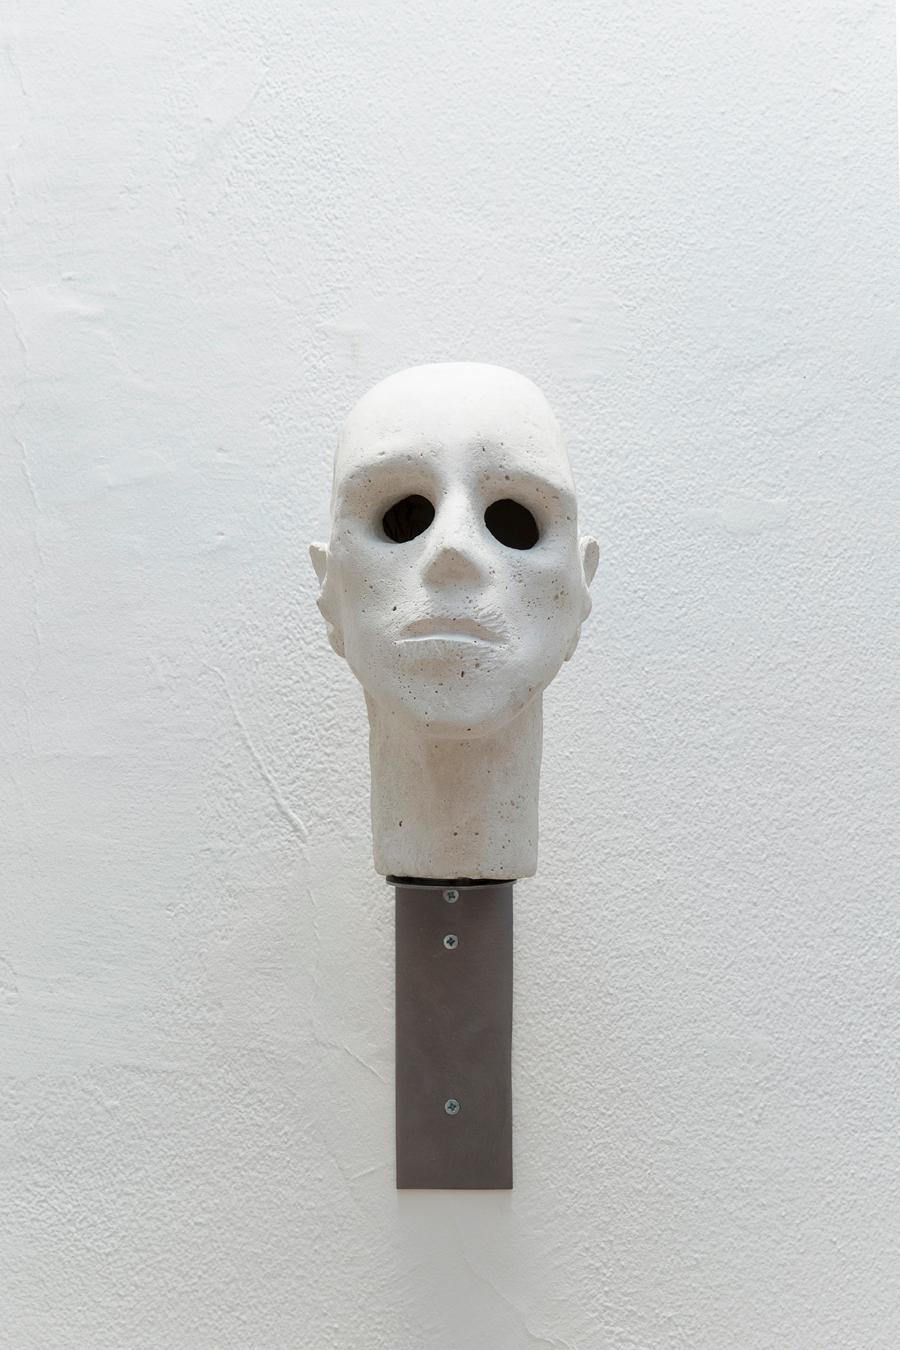 Miroslaw Balka, The Skull, 1989, concrete, steel, 27 17 20 cm. Courtesy: the artist and Galleria Raffaella Cortese, Milano; photograph: Lorenzo Palmieri space without their knowing.